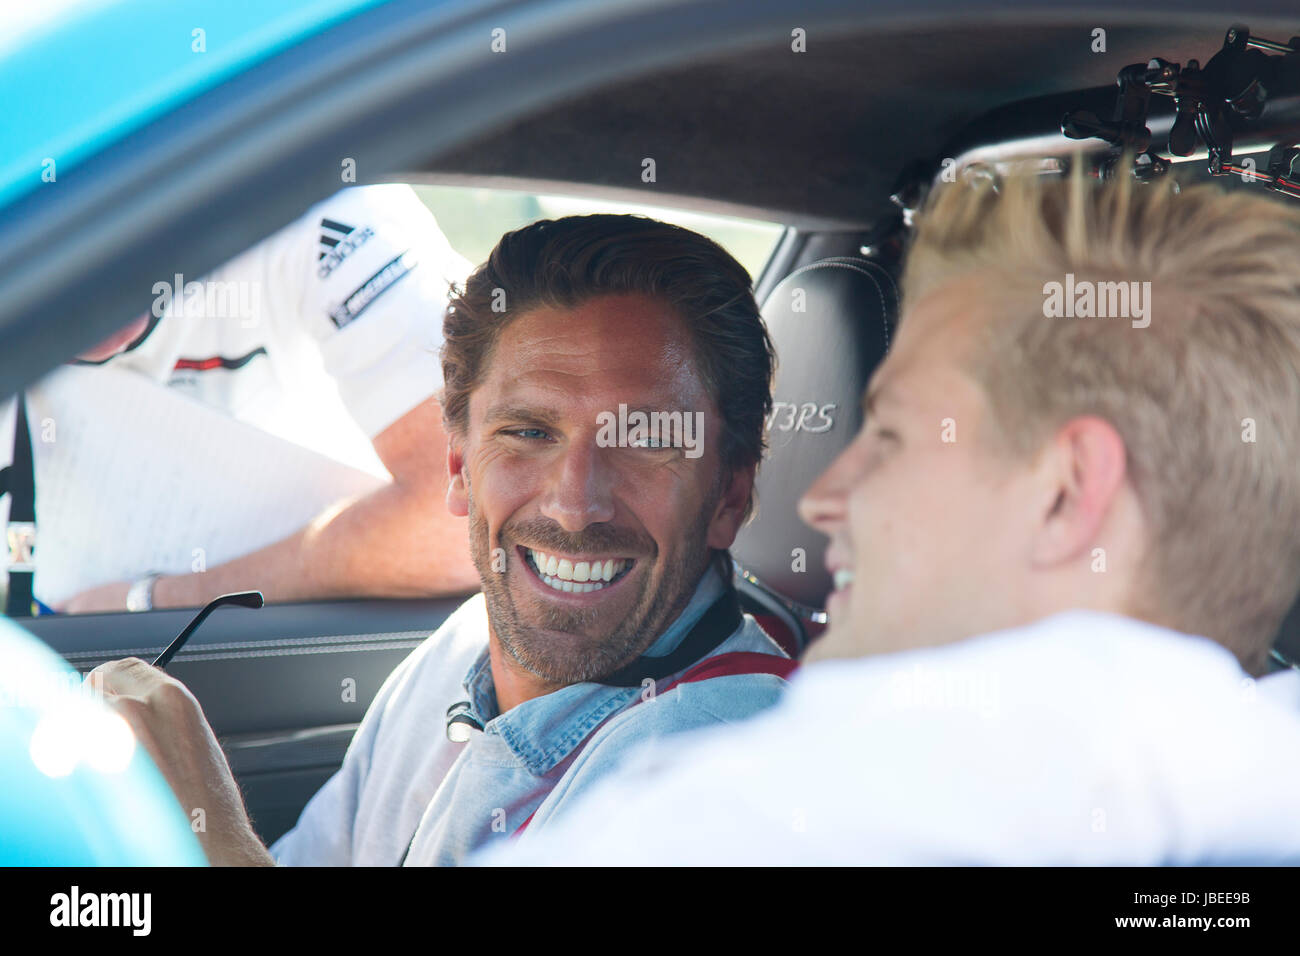 KARLSKOGA, SWEDEN. 14th AUGUST 2016. Hockey player  Henrik Lundqvist and racing driver Marcus Ericsson in a car after a race. Stock Photo